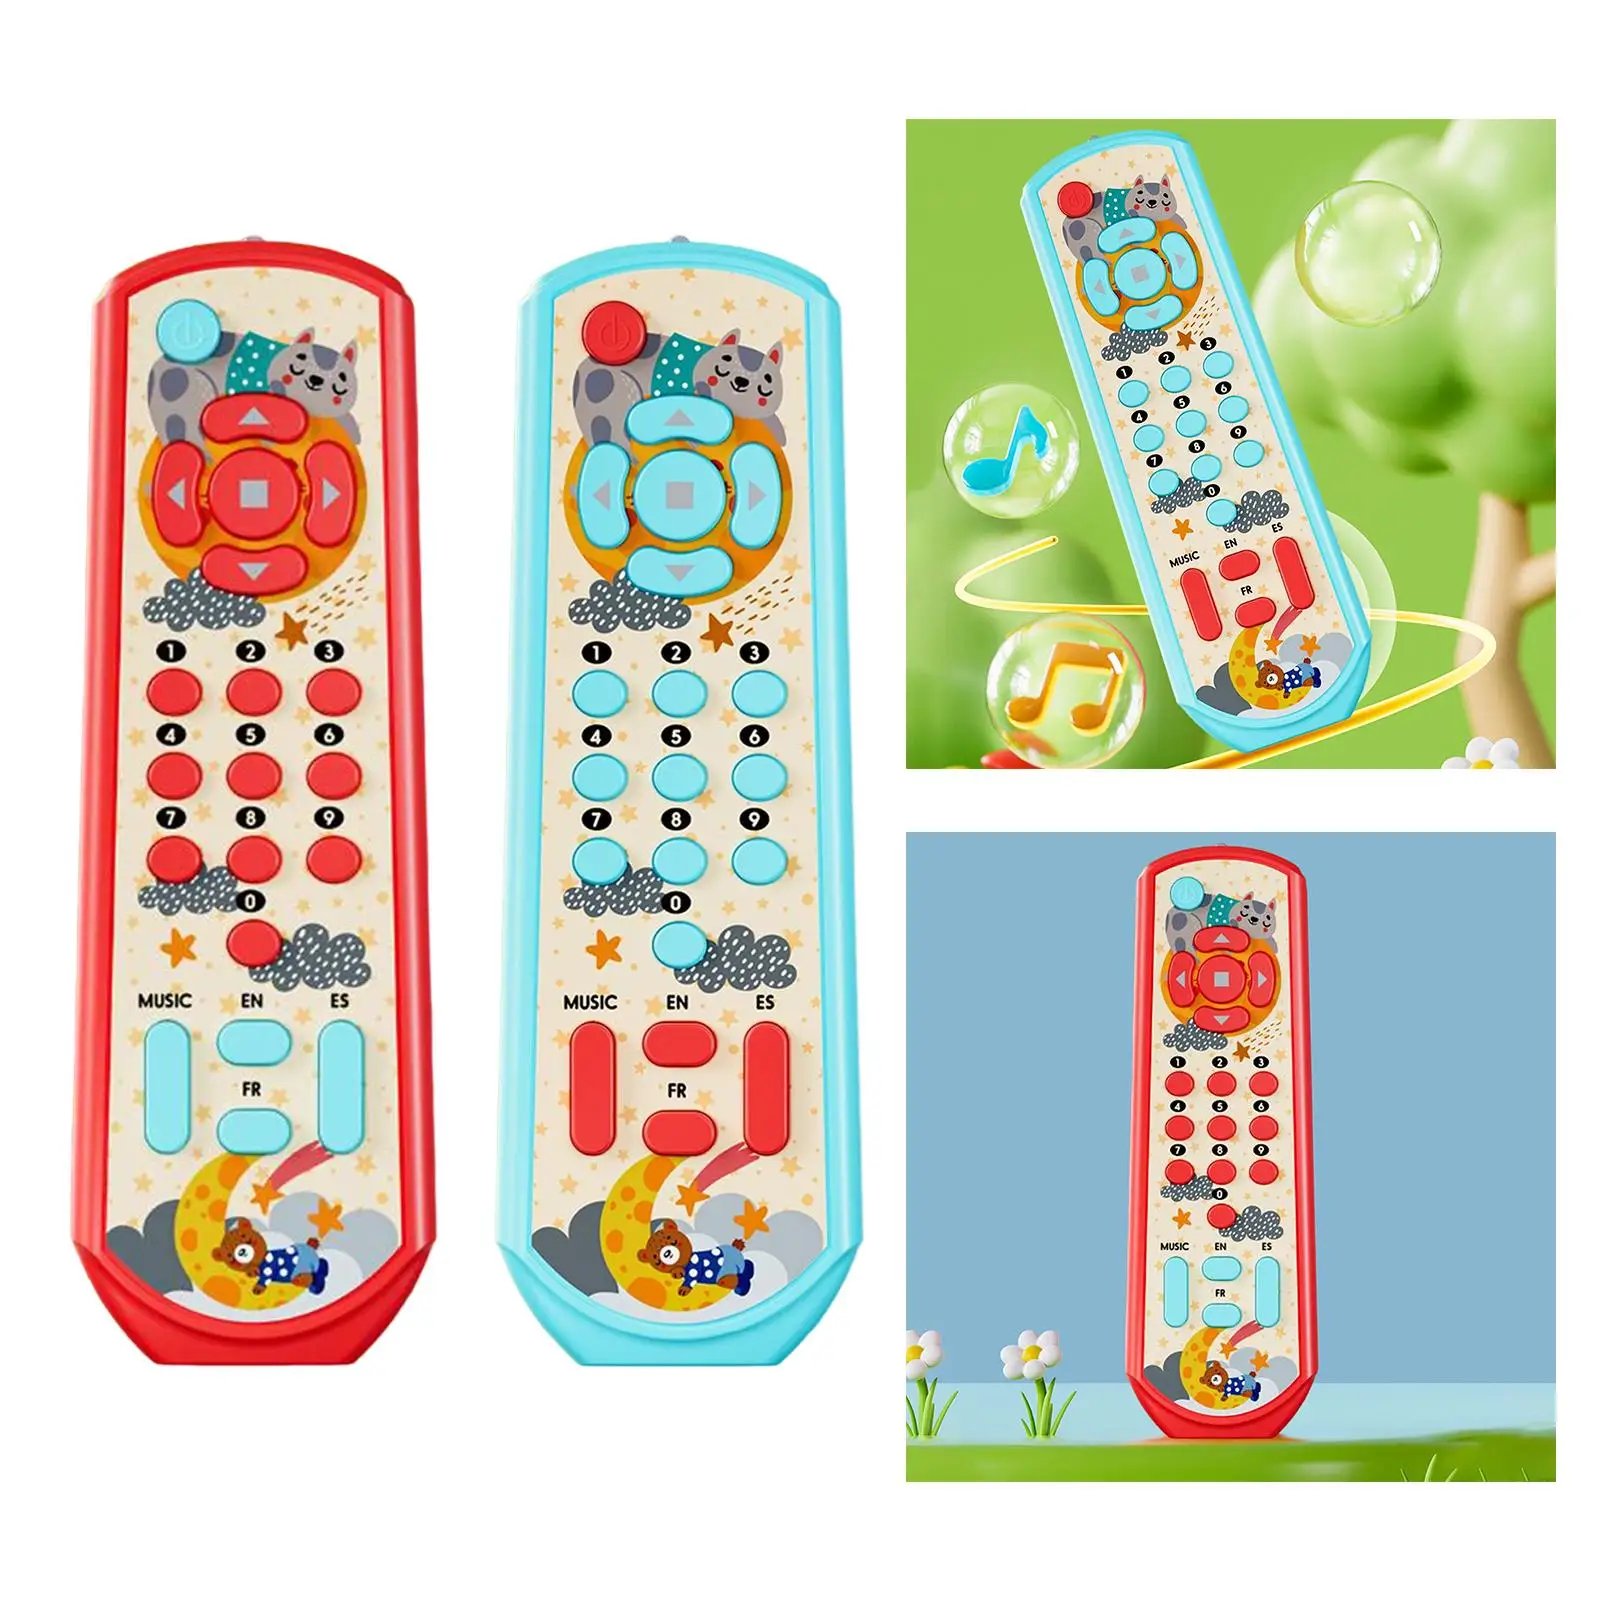 TV Remote Control Toy Numbers Learning Machine Pretend Play with Sound Education Toys for Toddler Kids Baby Children Gifts